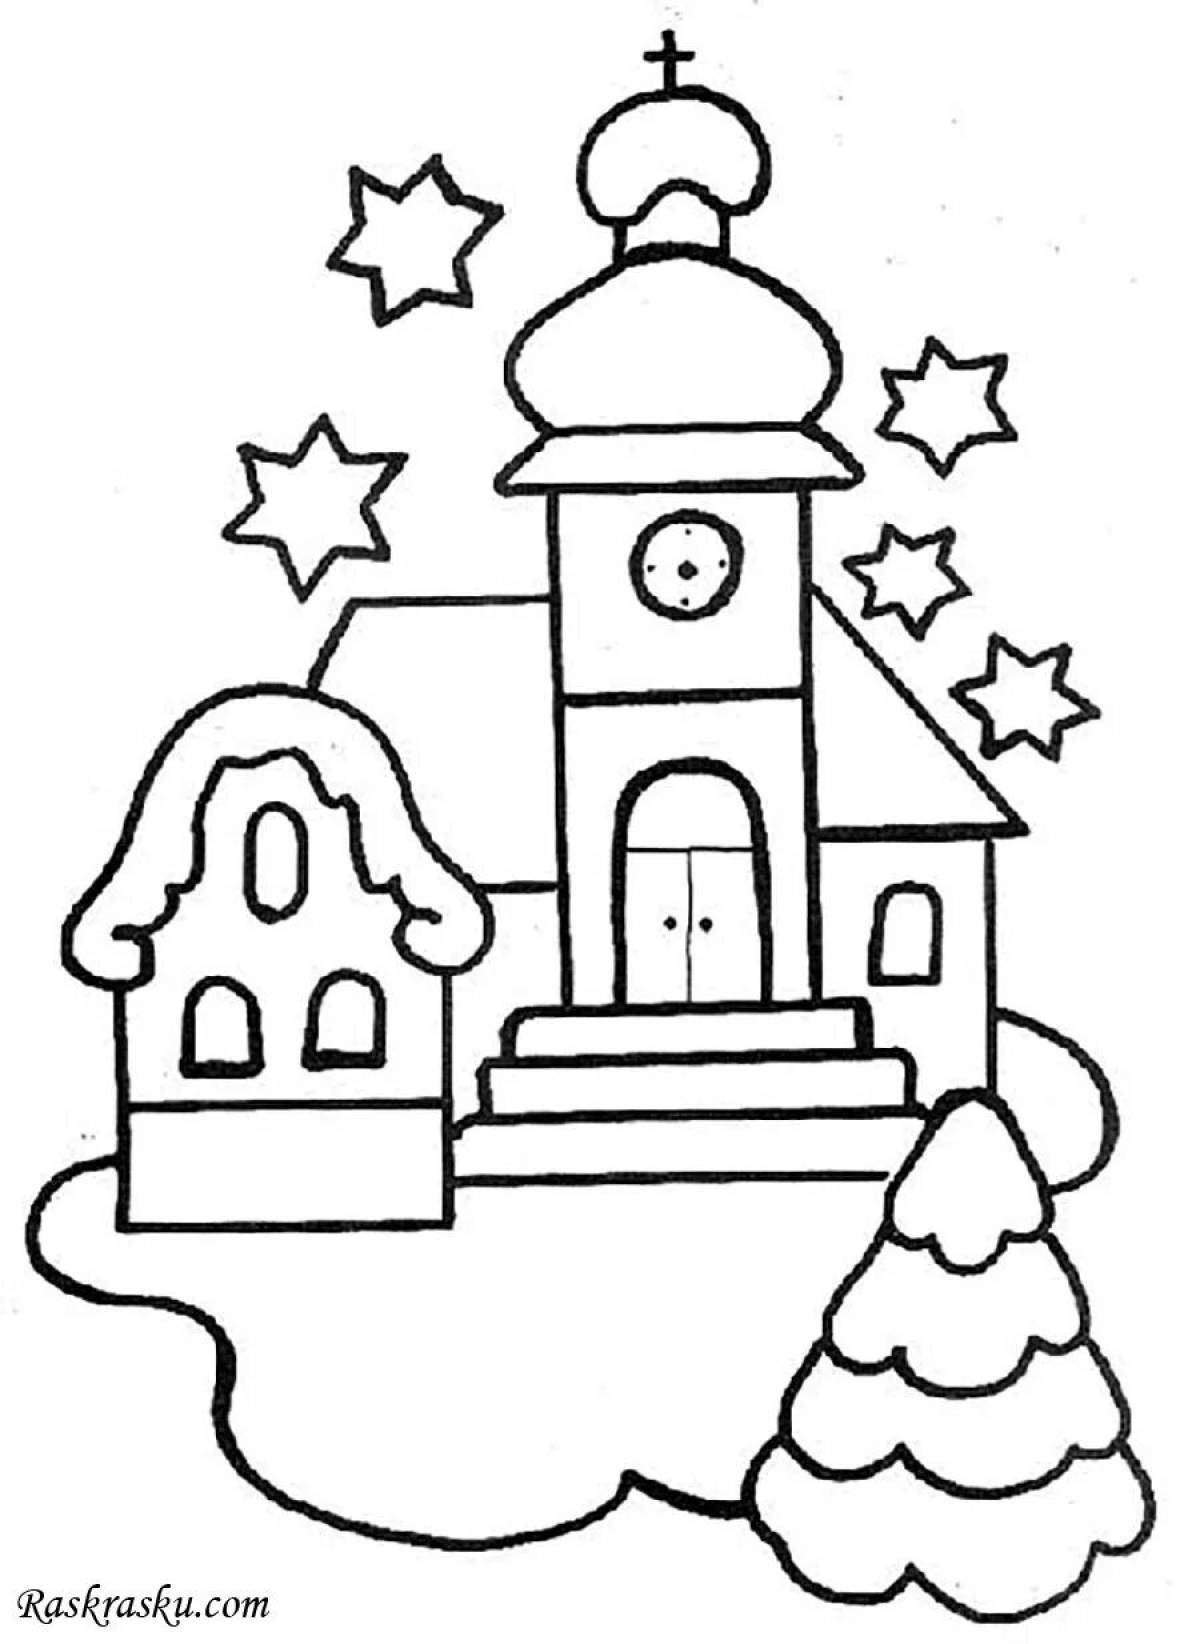 Living orthodox church coloring book for kids